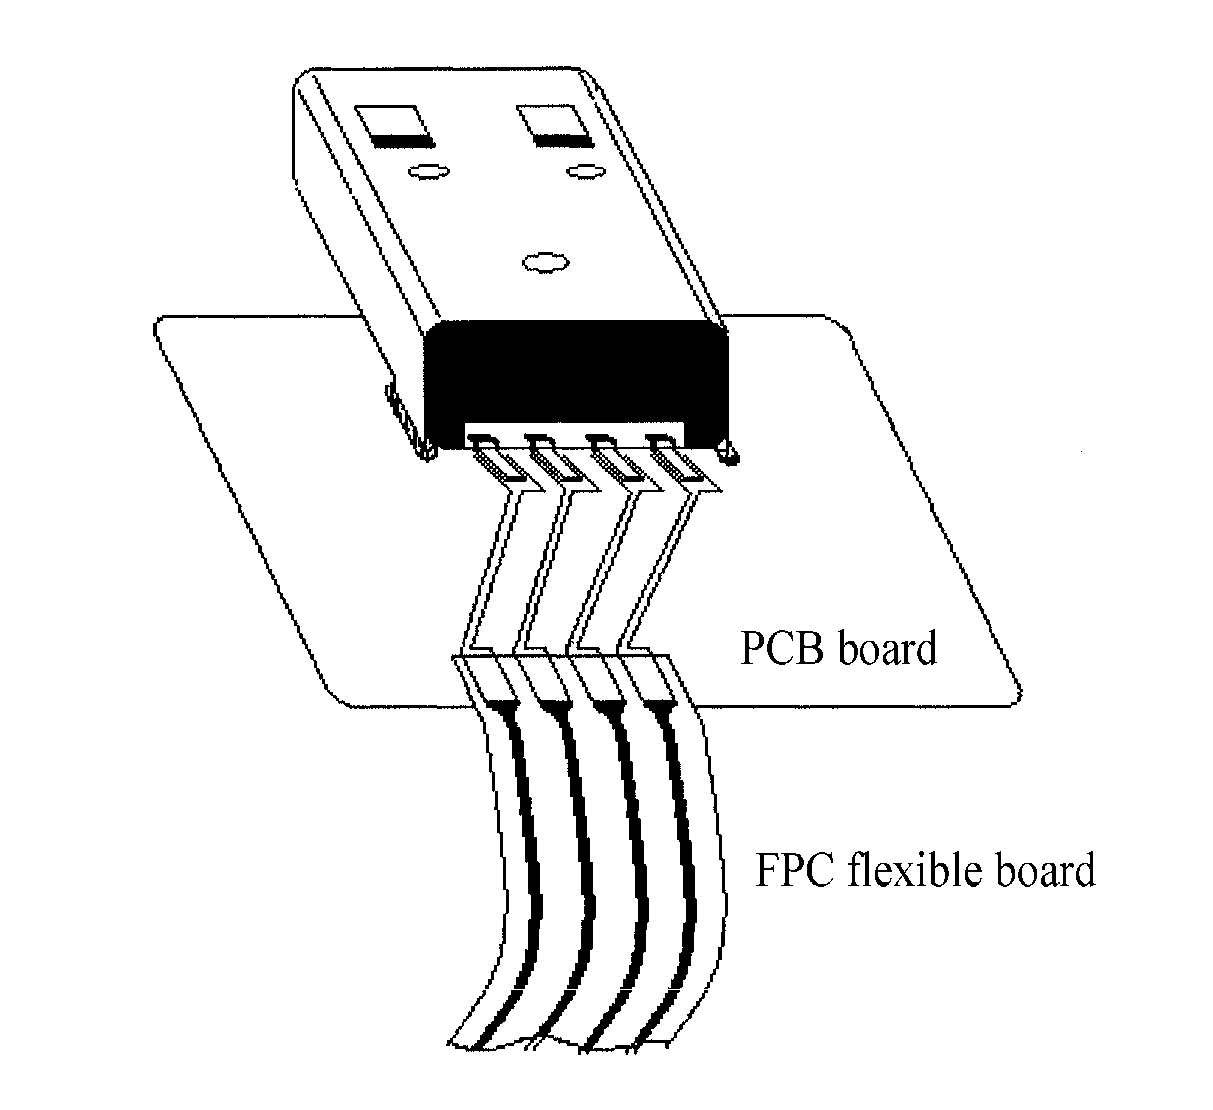 Method and apparatus for improving radio performance of wireless data terminal device